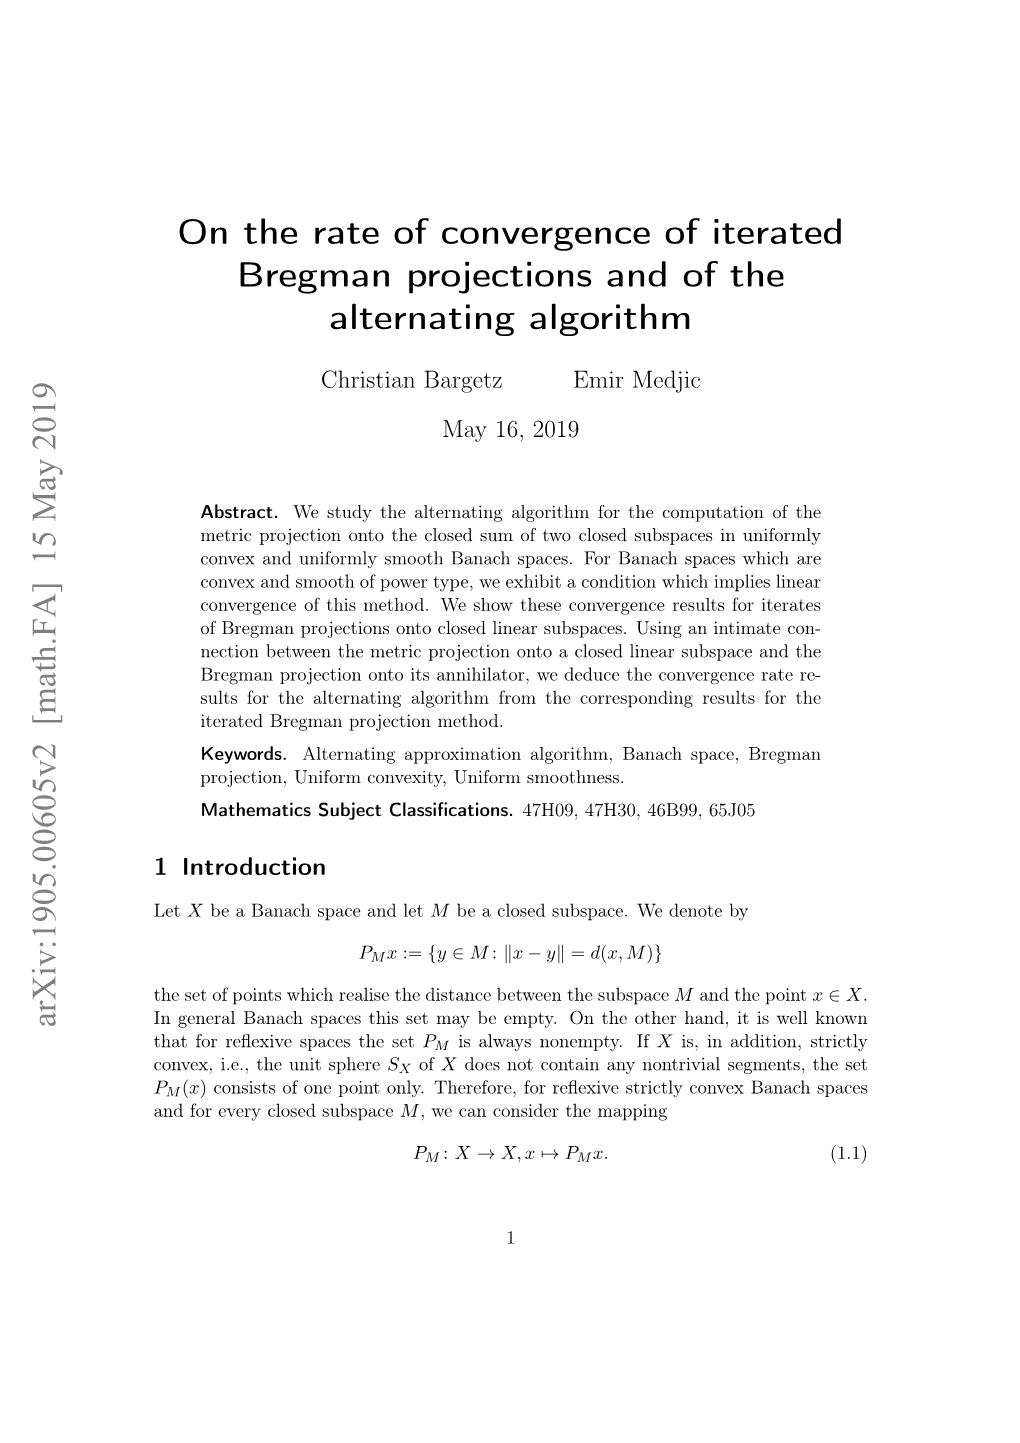 On the Rate of Convergence of Iterated Bregman Projections and of the Alternating Algorithm